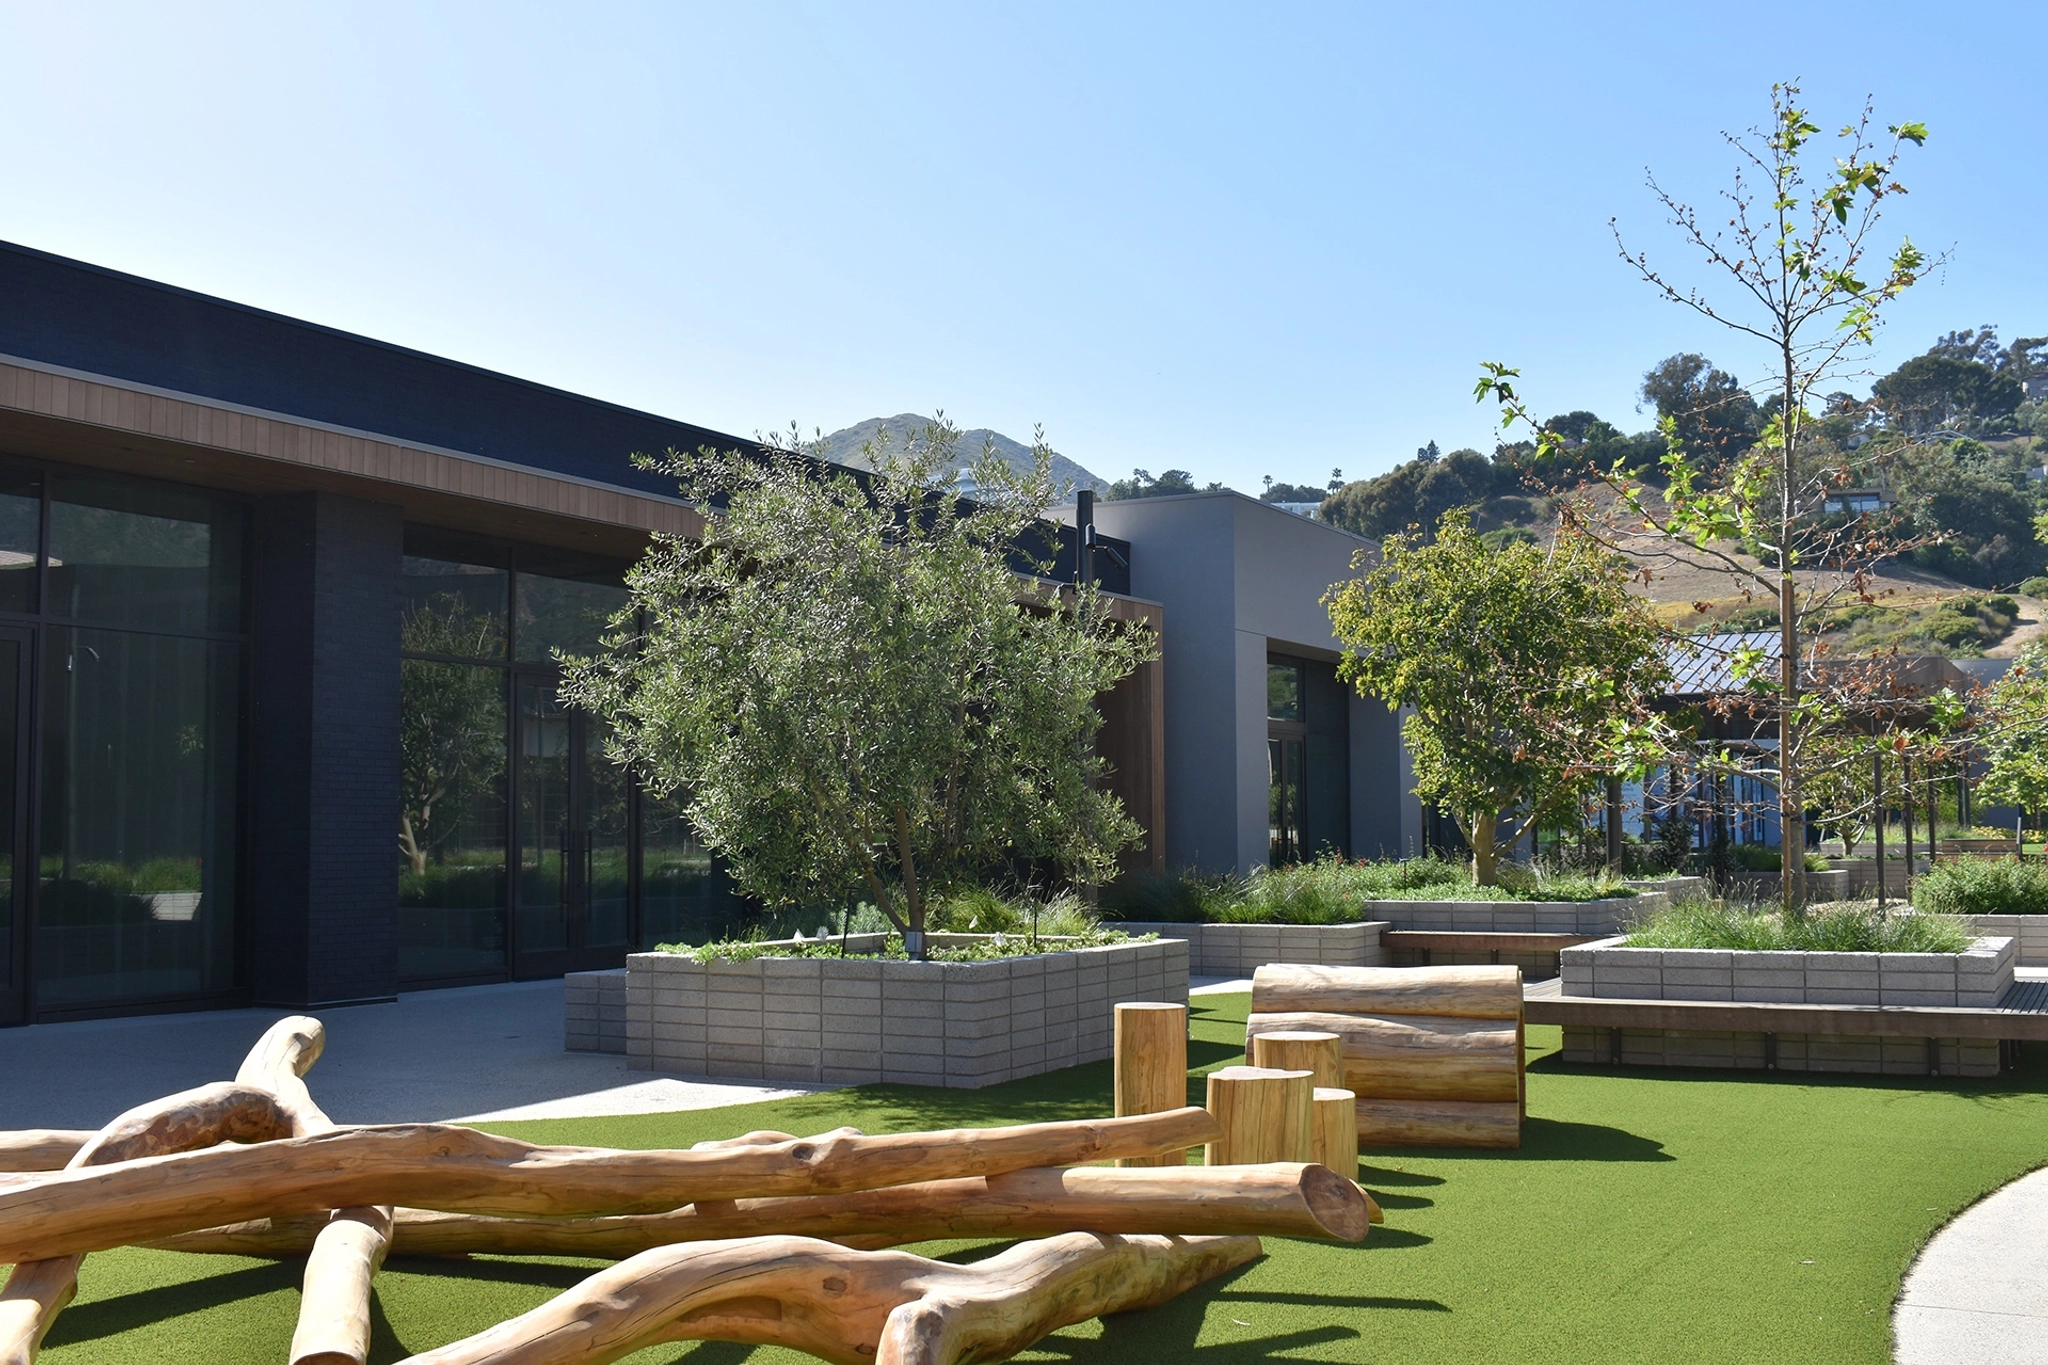 Outdoor courtyard with modern buildings, green artificial turf, trees, and wooden log seating under a clear blue sky—a serene extension of the coworking space.